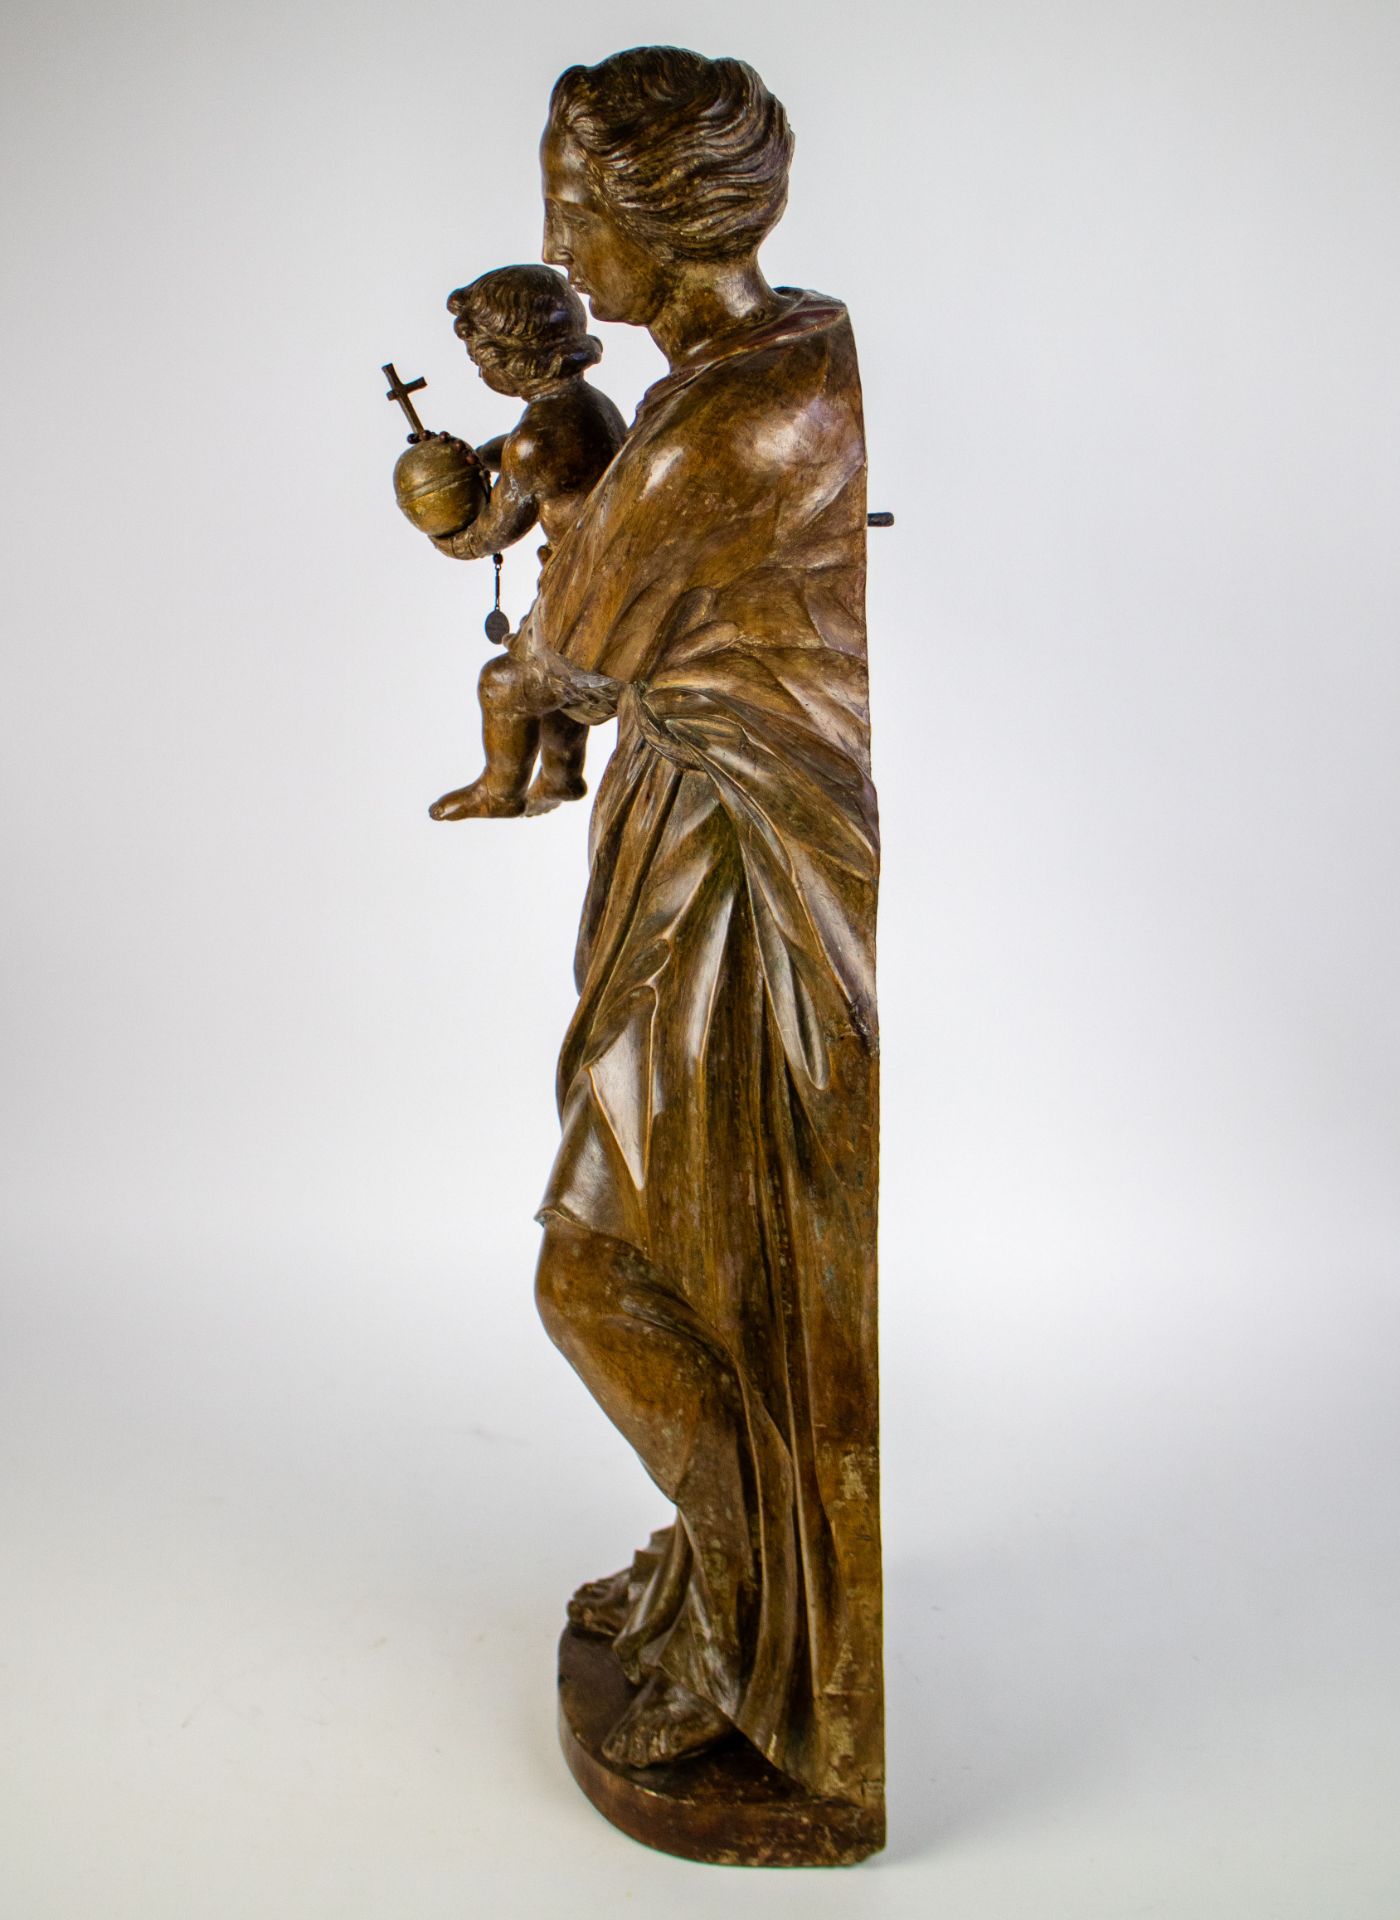 Statue of Virgin Mary carrying Jesus, with globe in his hand - Image 4 of 6